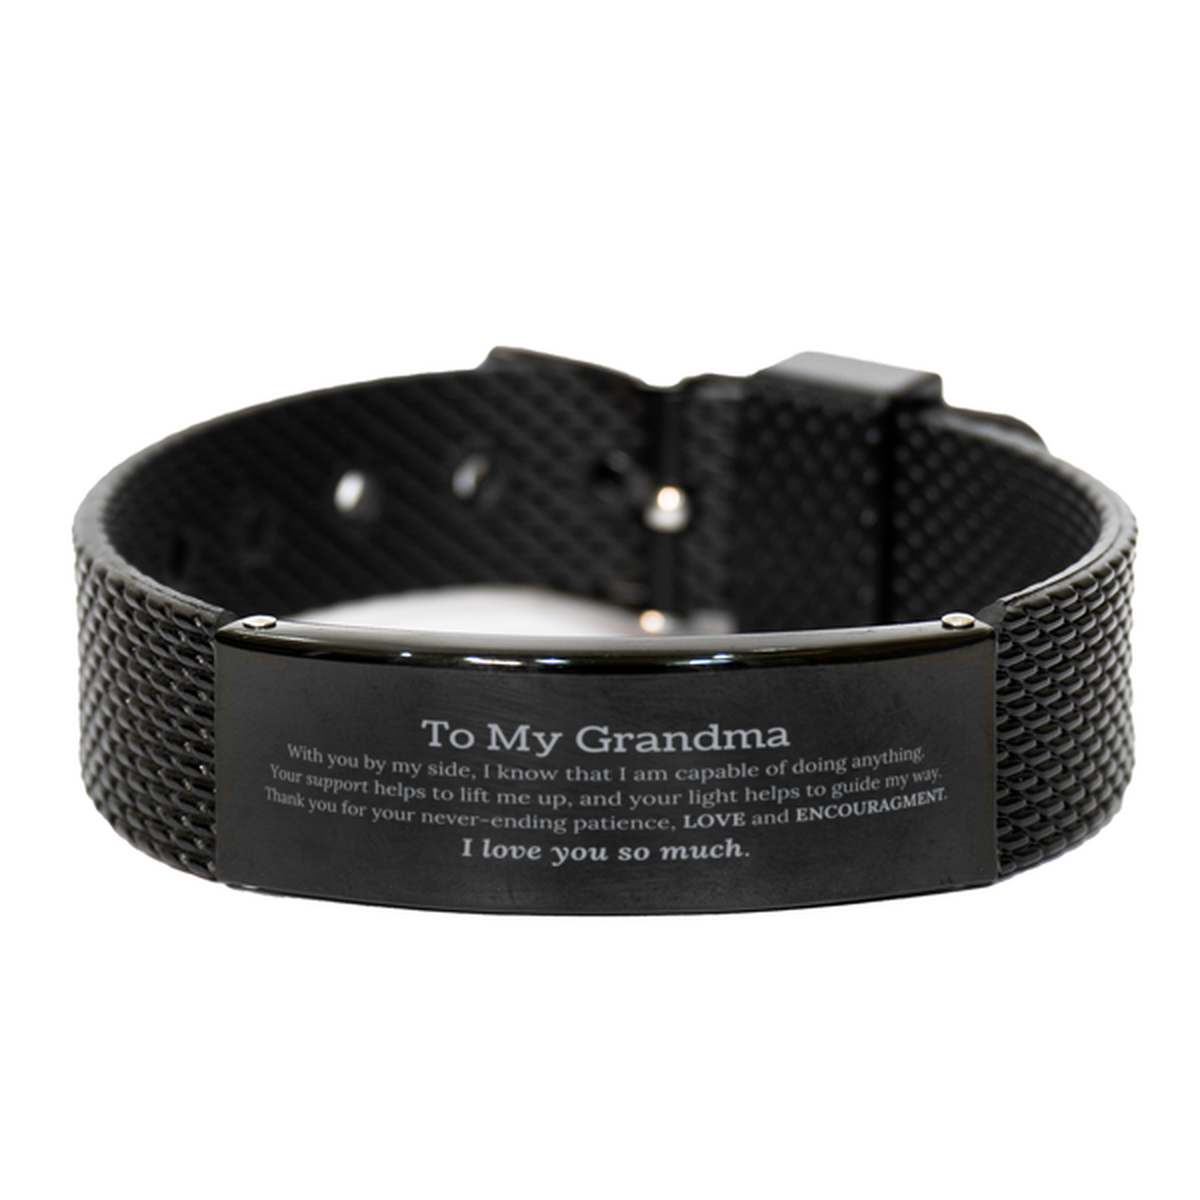 Appreciation Grandma Black Shark Mesh Bracelet Gifts, To My Grandma Birthday Christmas Wedding Keepsake Gifts for Grandma With you by my side, I know that I am capable of doing anything. I love you so much